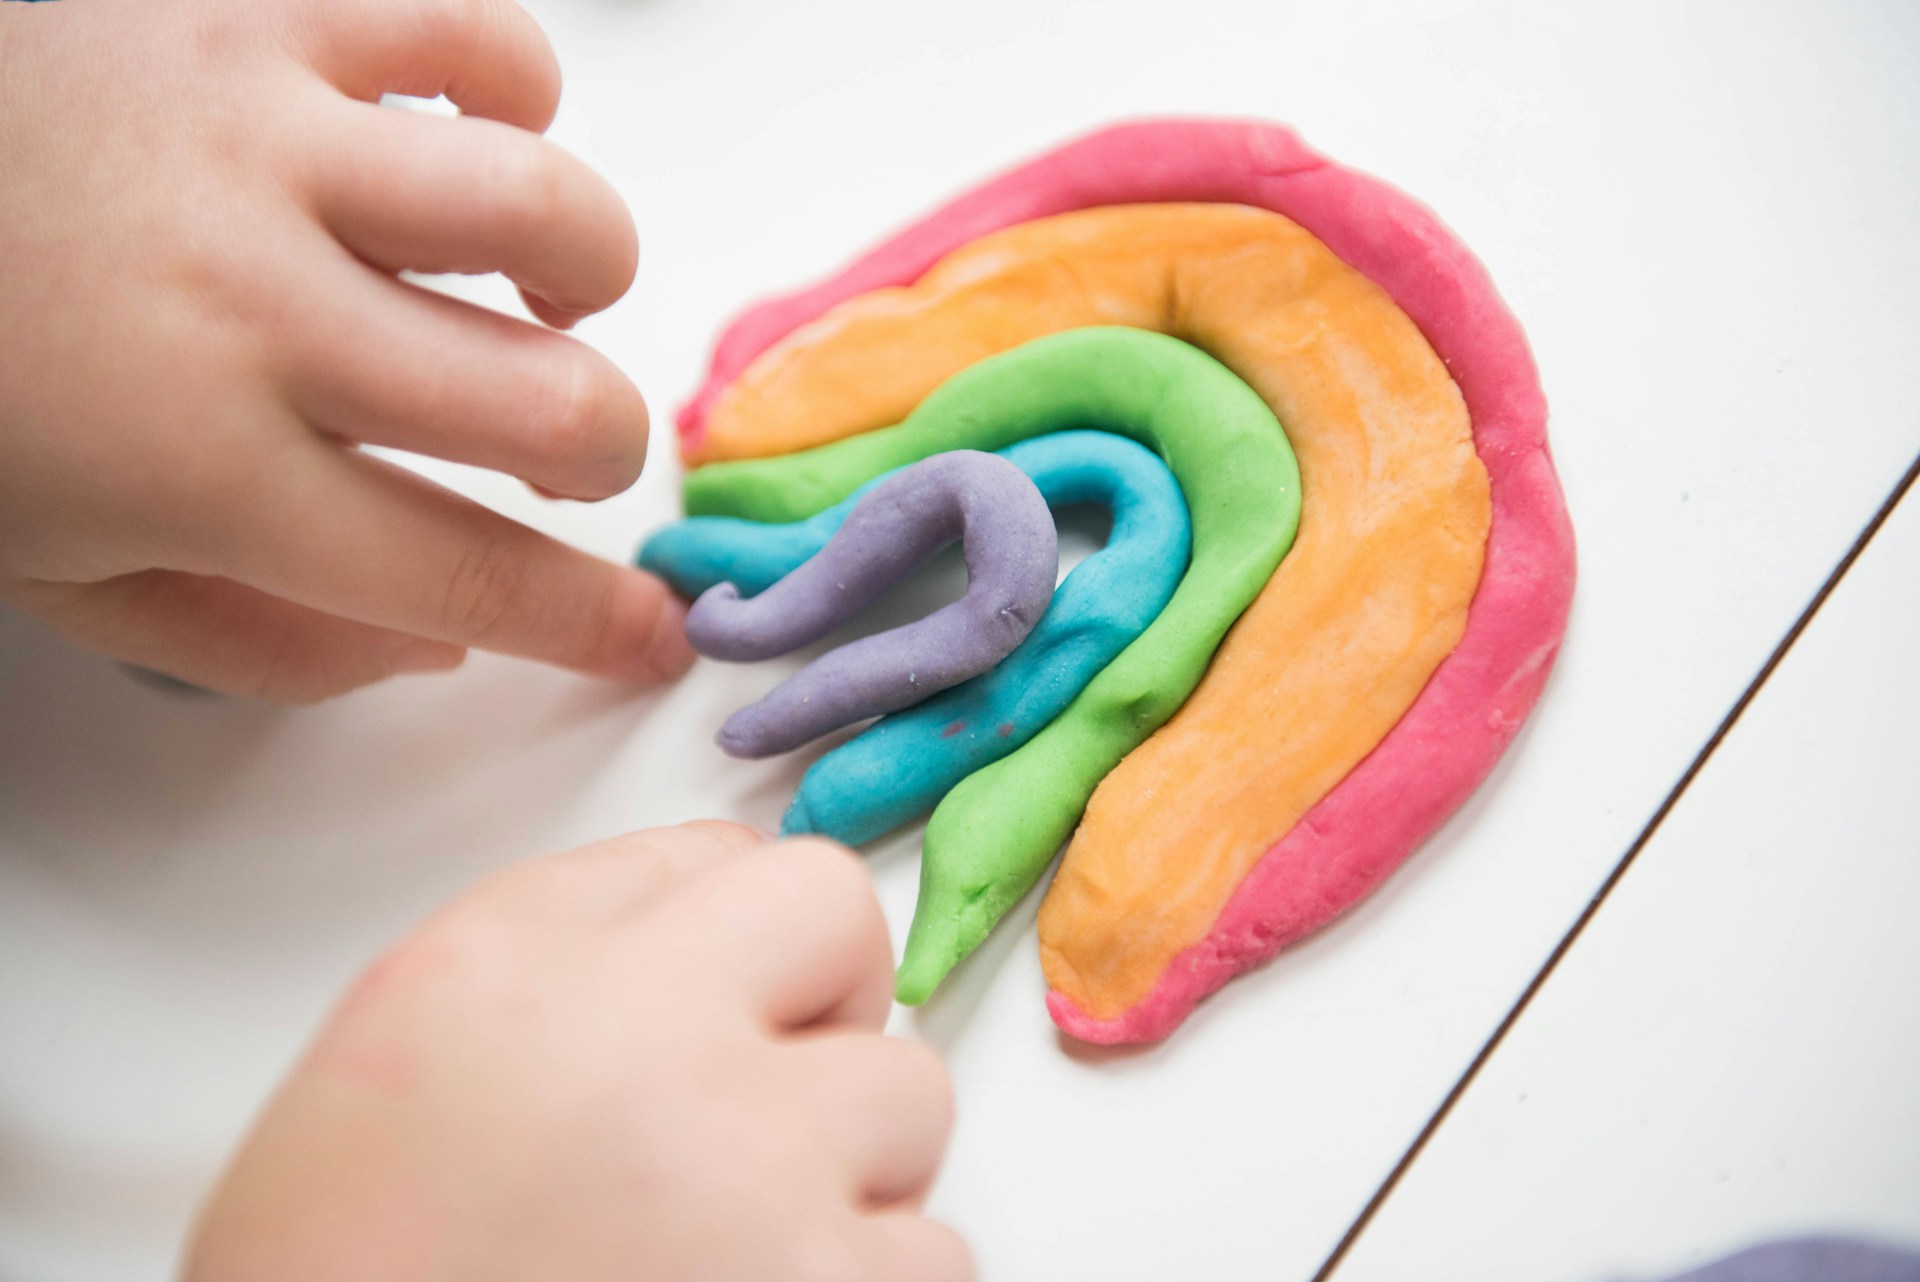 Play with Modeling Clay or Play Dough